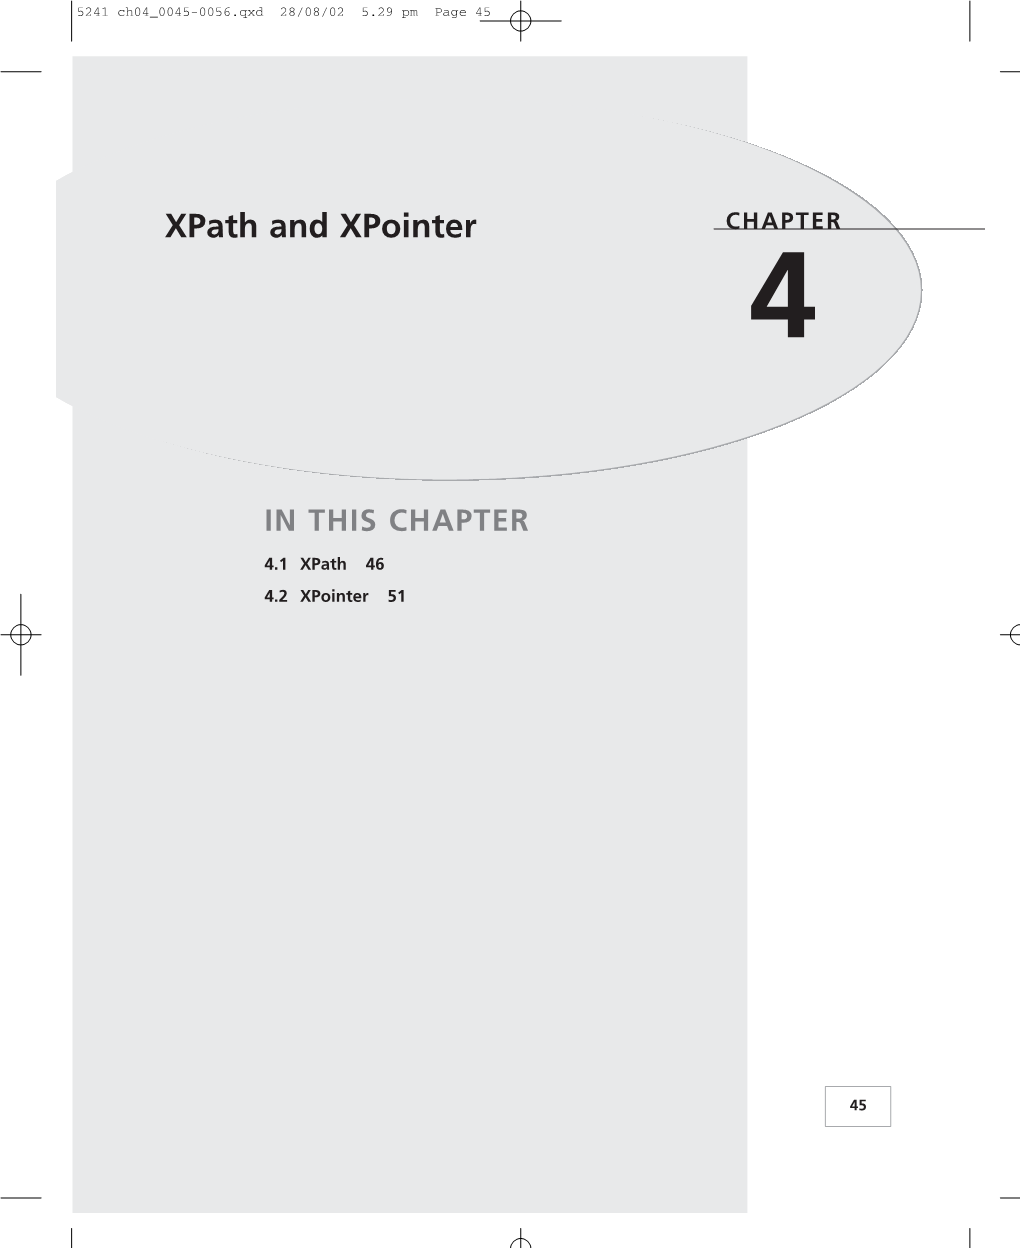 Xpath and Xpointer CHAPTER 4